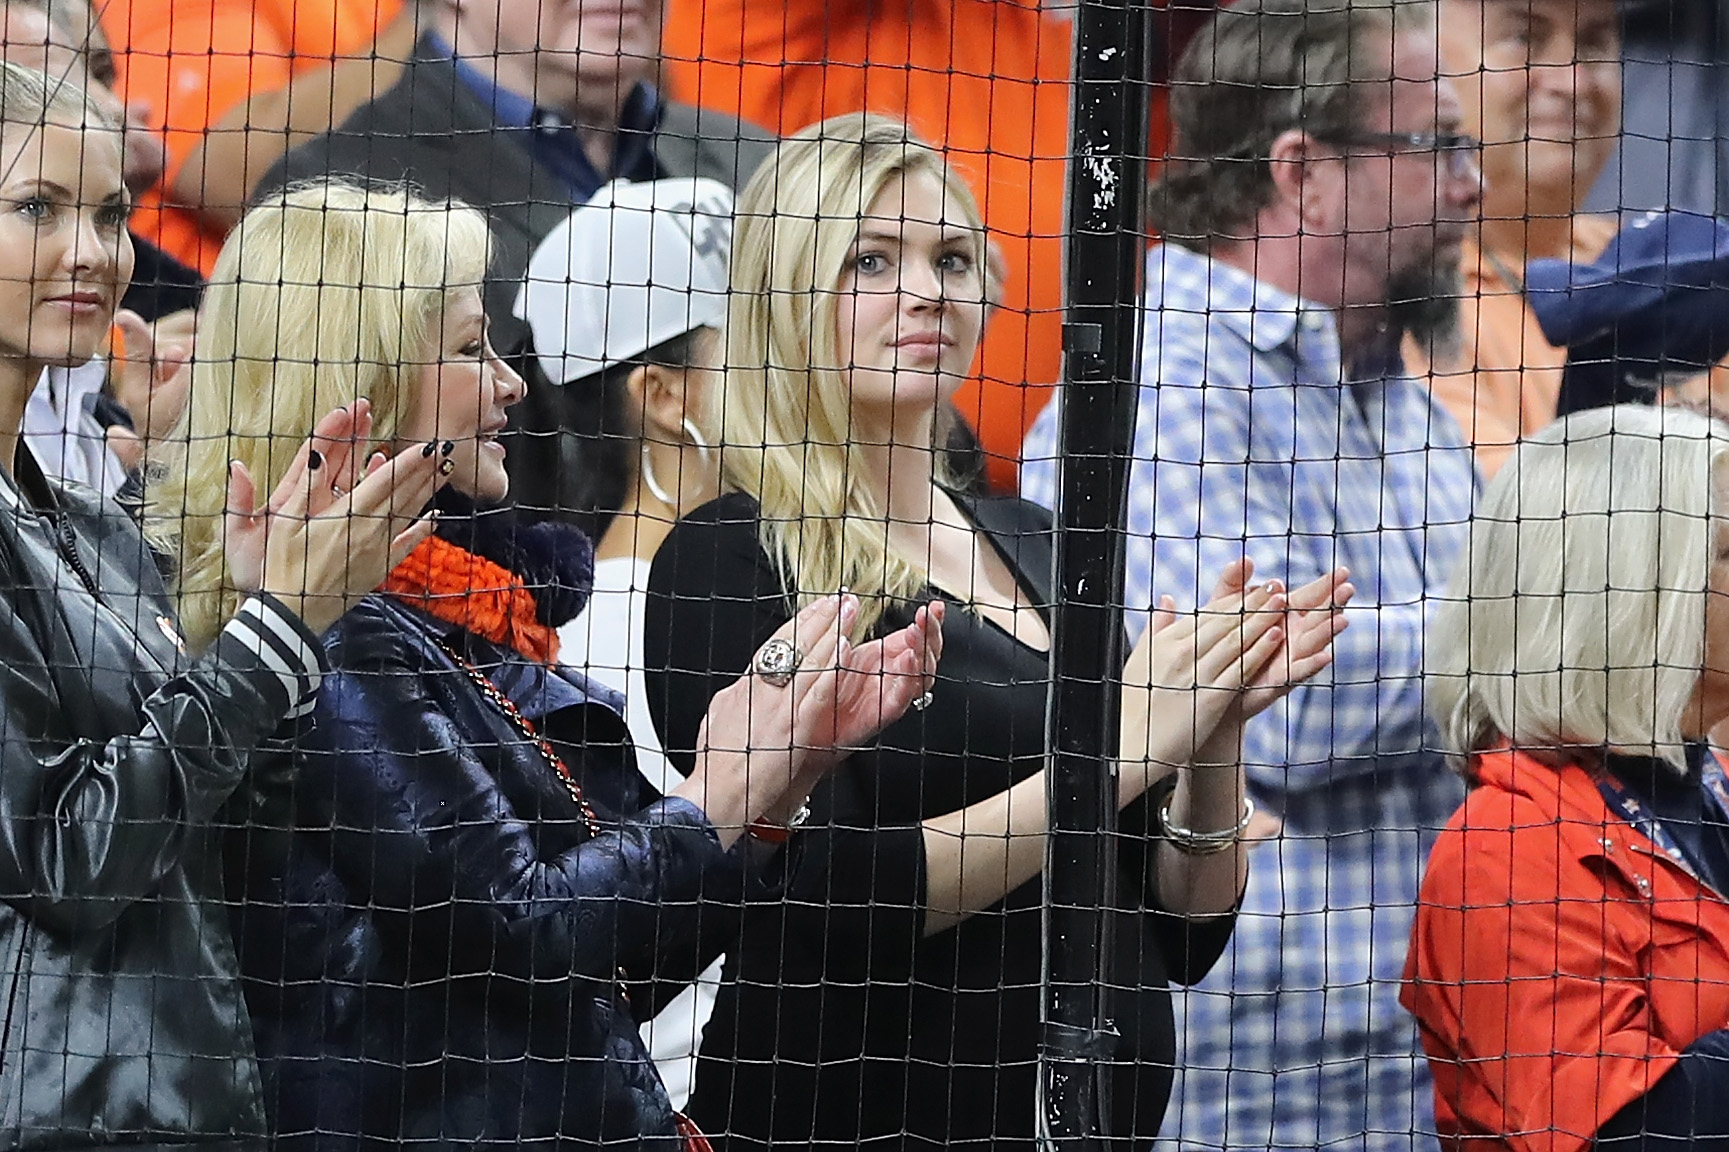 Kate Upton tweets displeasure with umpires from her seat at Astros game